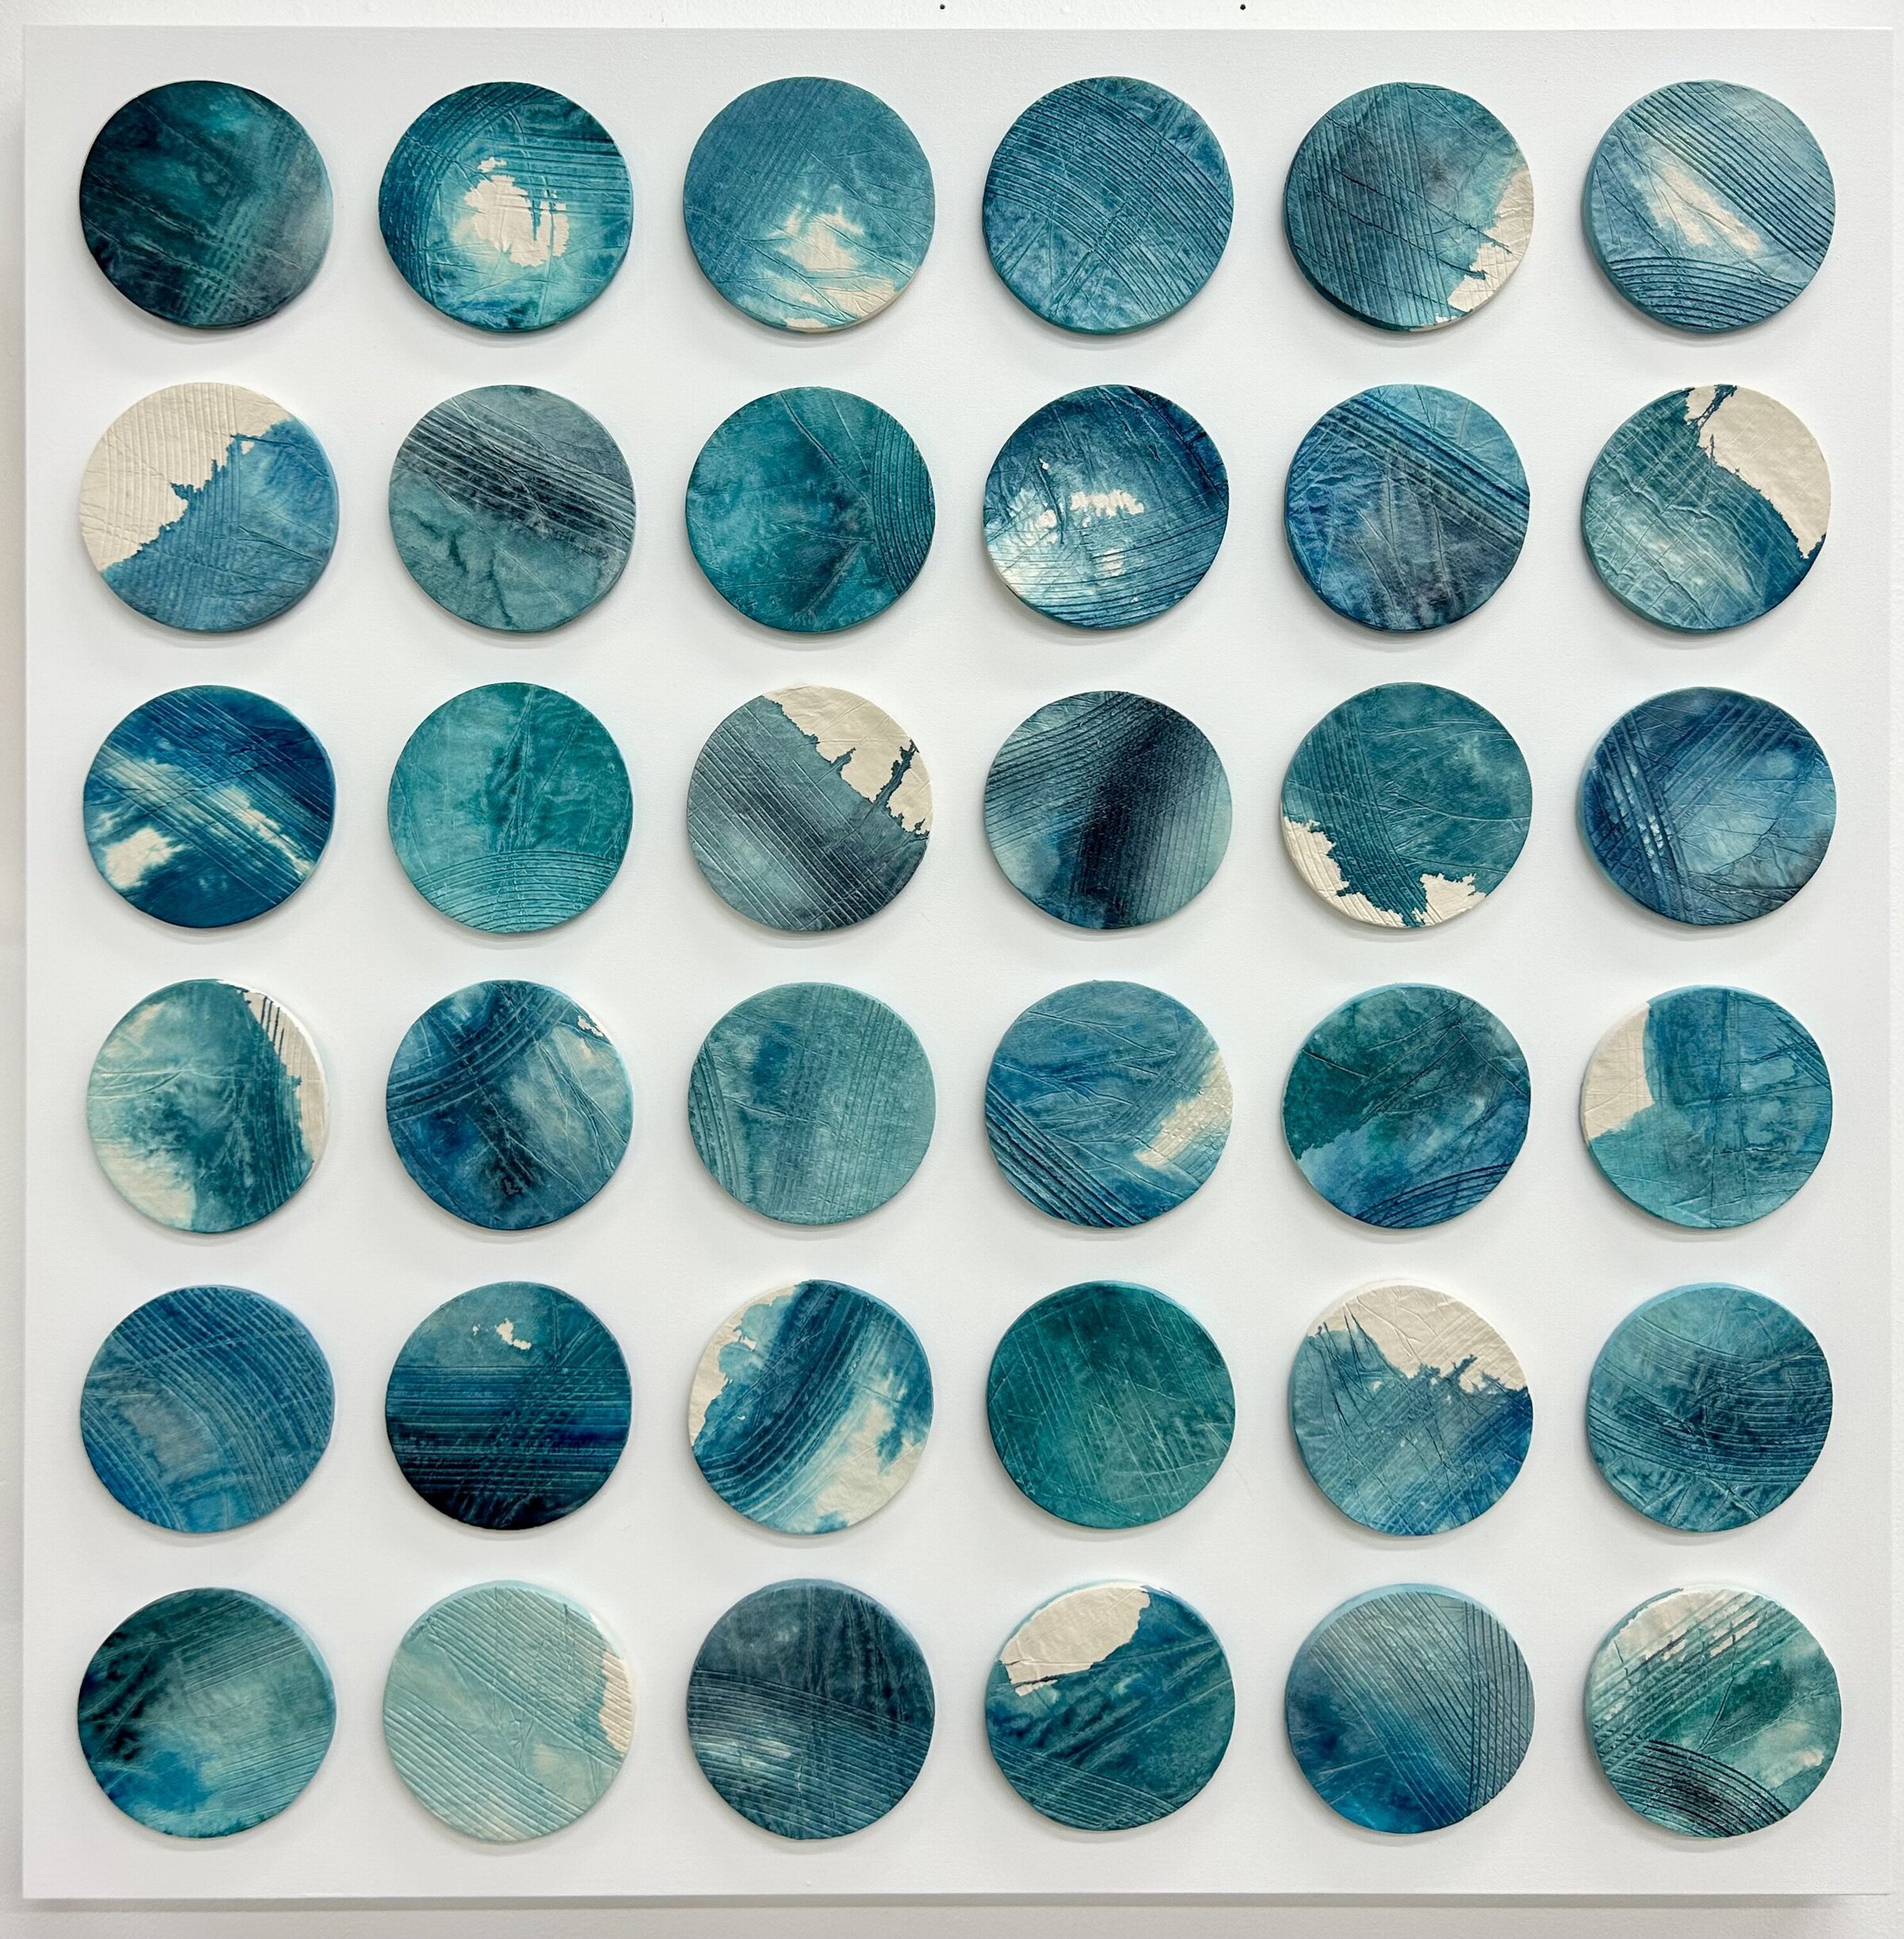 Emily Mann, Ink and Indigo, customizable dimensional wall artwork, paperclay disks with watercolor, 36x36-1